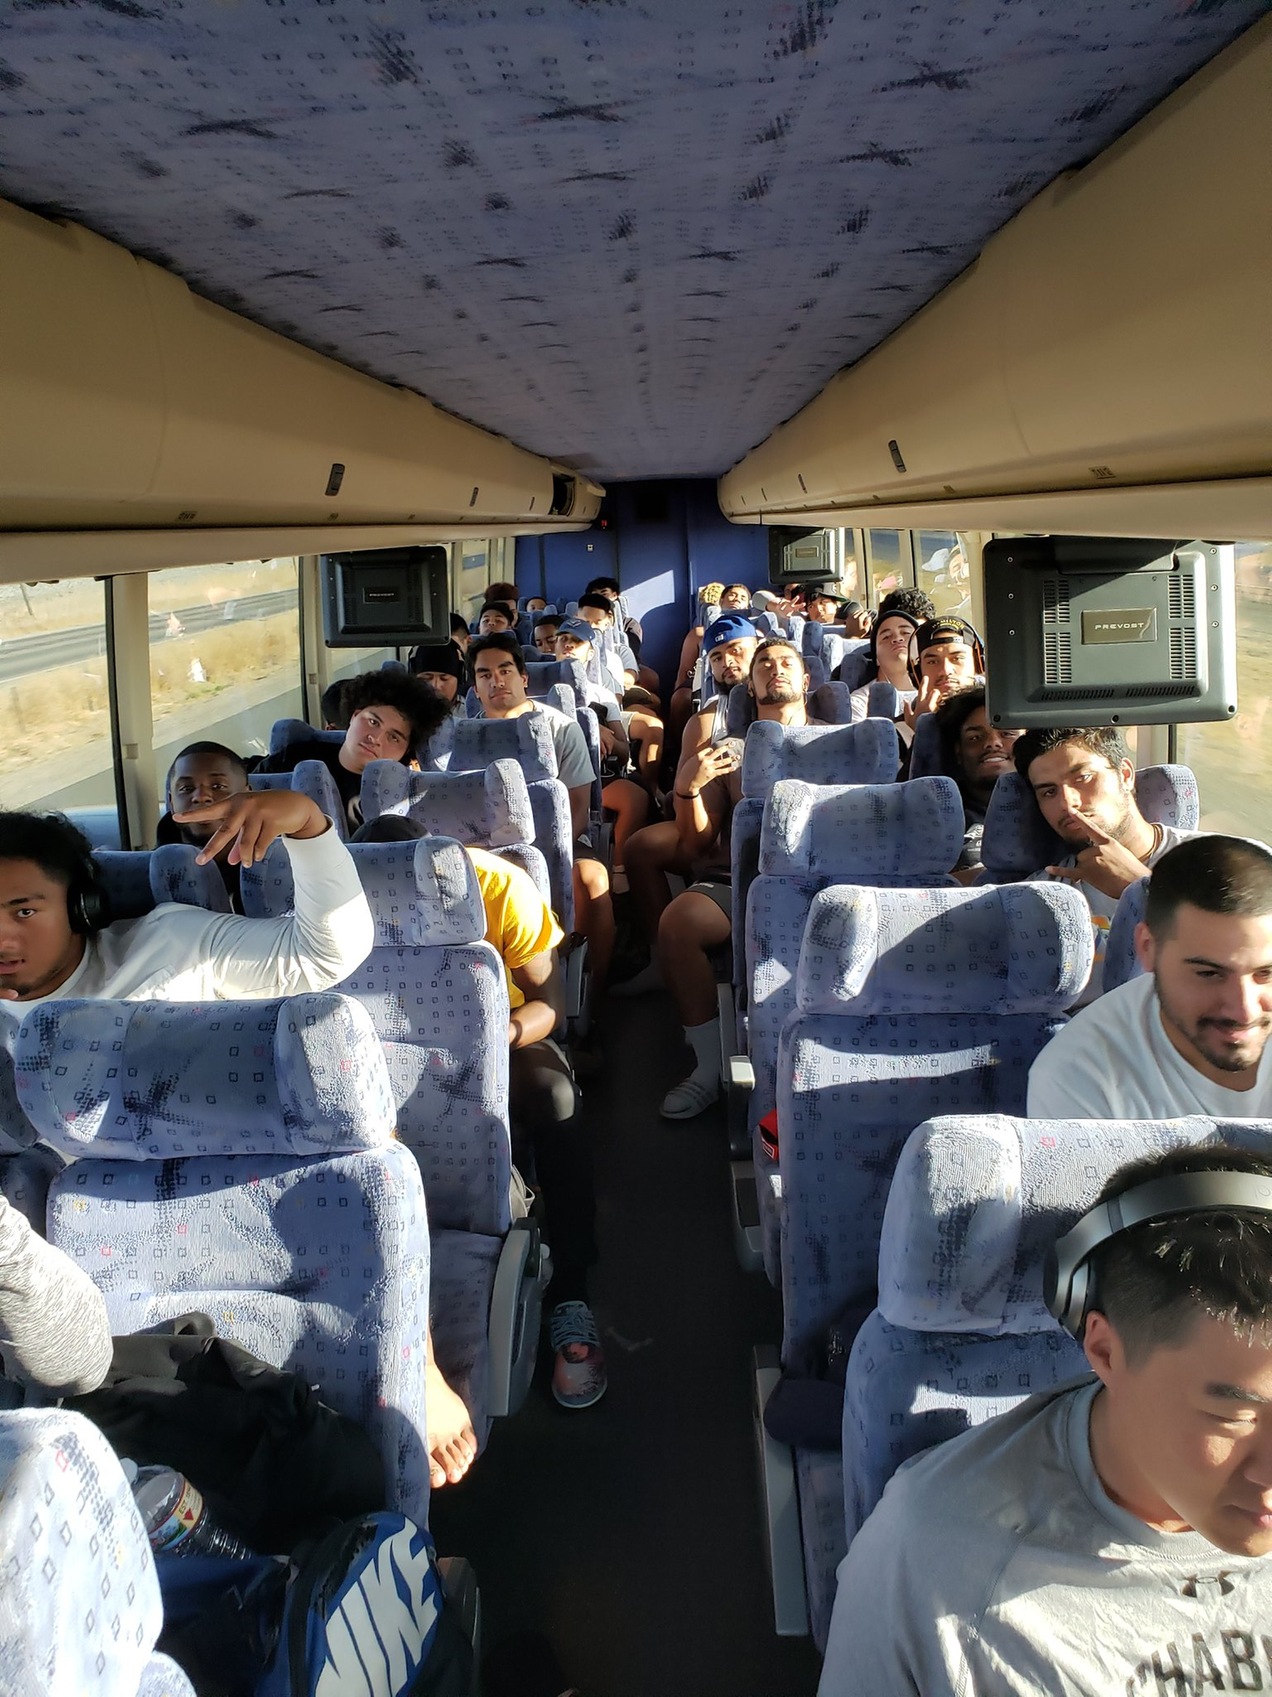 Chabot Football teams traveled to the College of Siskiyous, Sept 22, 2018